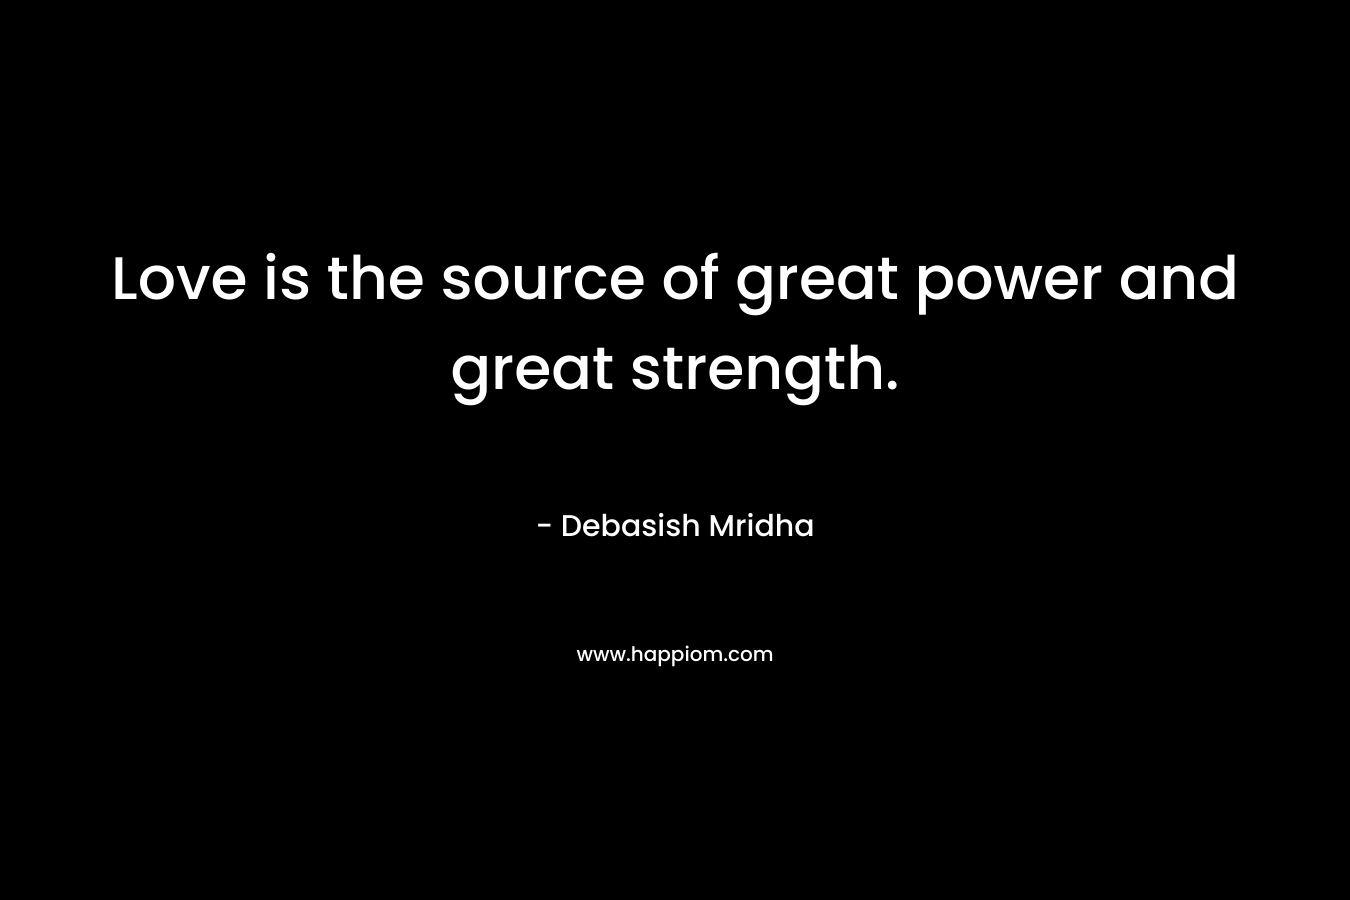 Love is the source of great power and great strength.